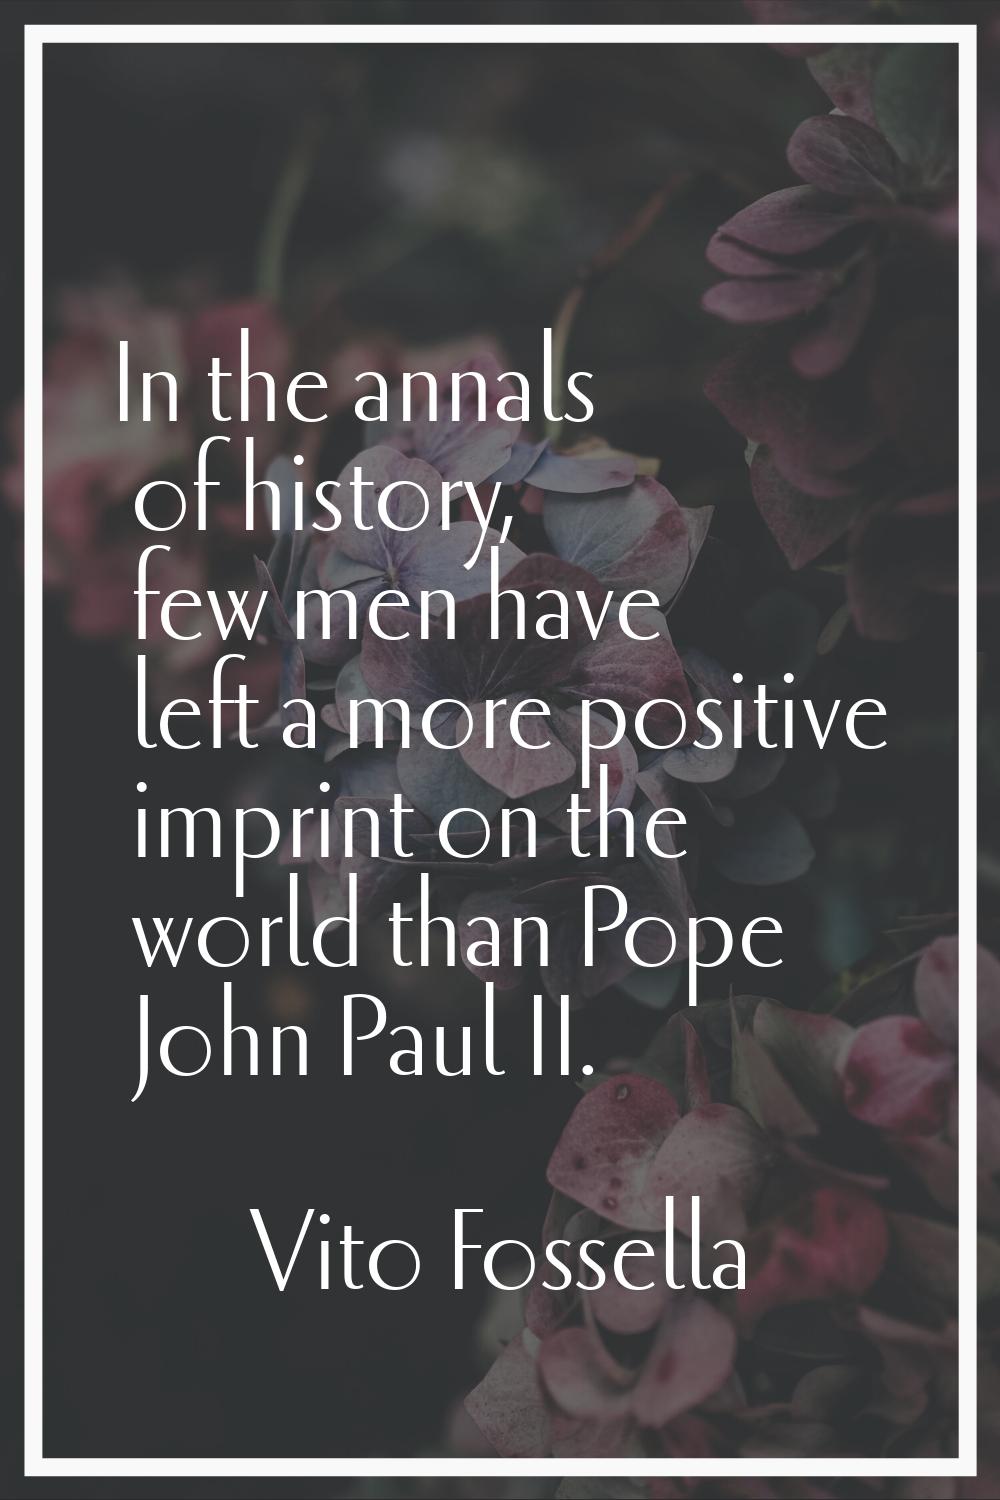 In the annals of history, few men have left a more positive imprint on the world than Pope John Pau